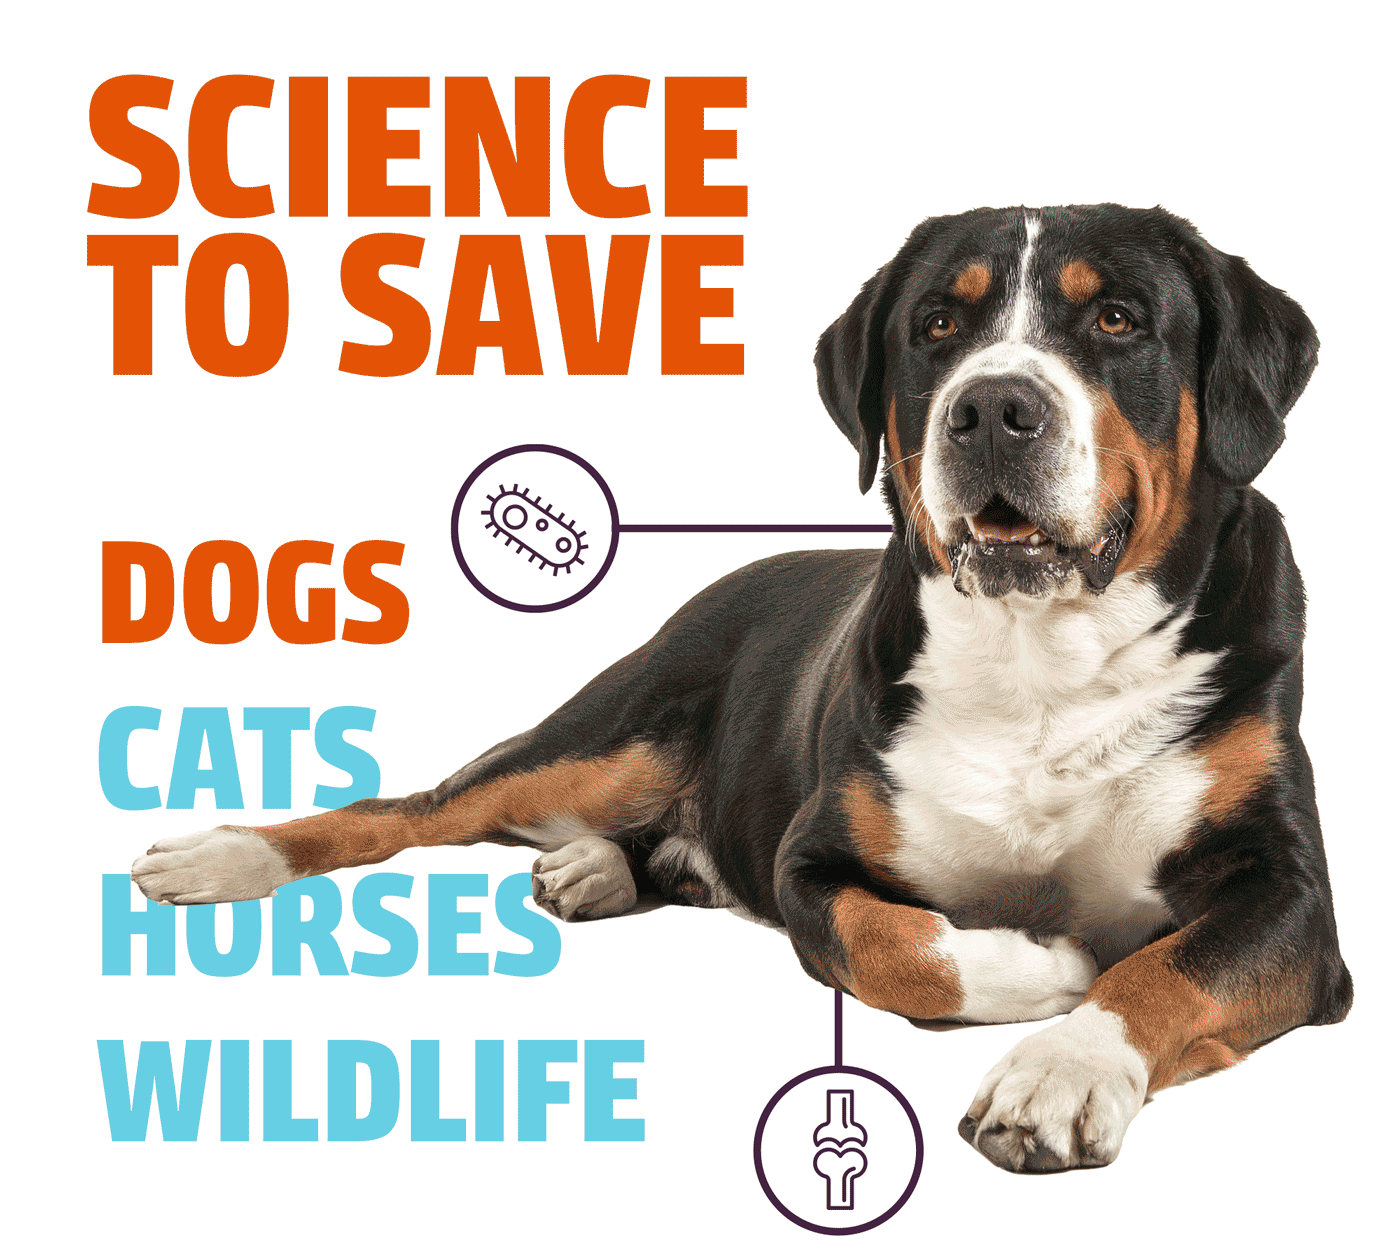 Science to Save Dogs, Science to Save Cats, Science to Save Horses, Science to Save Wildlife